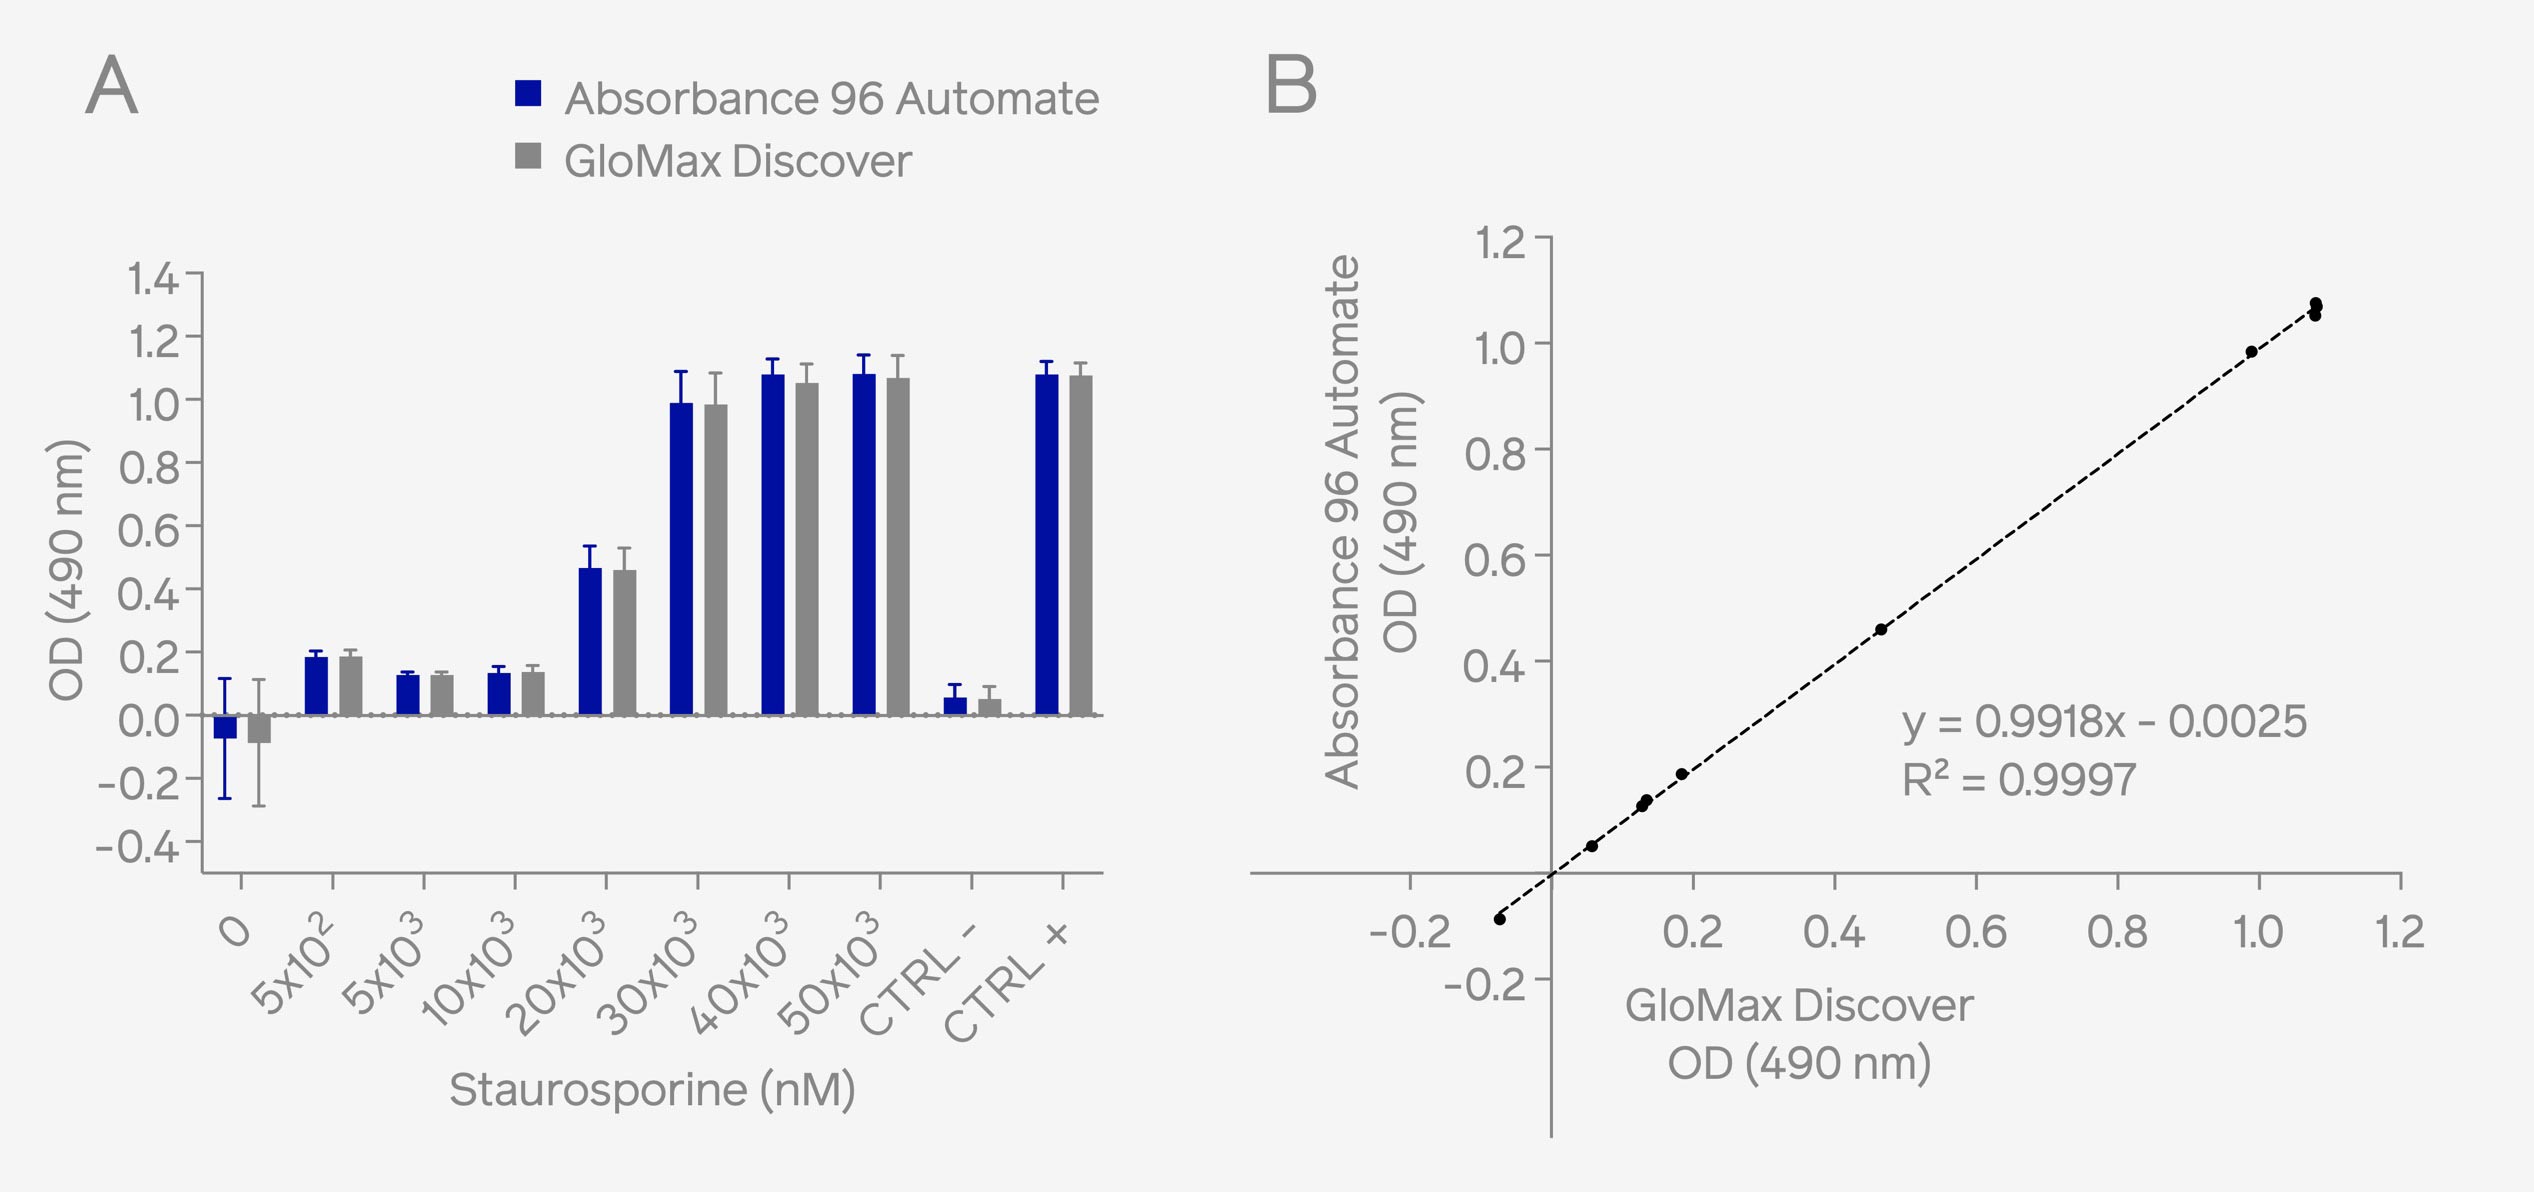 Fig. 1: HeLa cells were treated with Staurosporine to induce cellular cytotoxicity. Assessment of cellular cytotoxicity was conducted using the CytoTox 96® Non-radioactive Cytotoxicity Assay kit. Absorbance measurements at 490 nm were performed using both the on-deck integrated Absorbance 96 Automate on the epMotion® liquid handling system and the benchtop microplate reader, GloMax® Discover. Results demonstrate comparable OD readouts (A) and high correlation (B) across different OD ranges. Enhancing Lab Automation: Validating Absorbance 96 Automate Integration with Eppendorf epMotion® for Automated Cell-Based Assays Byonoy